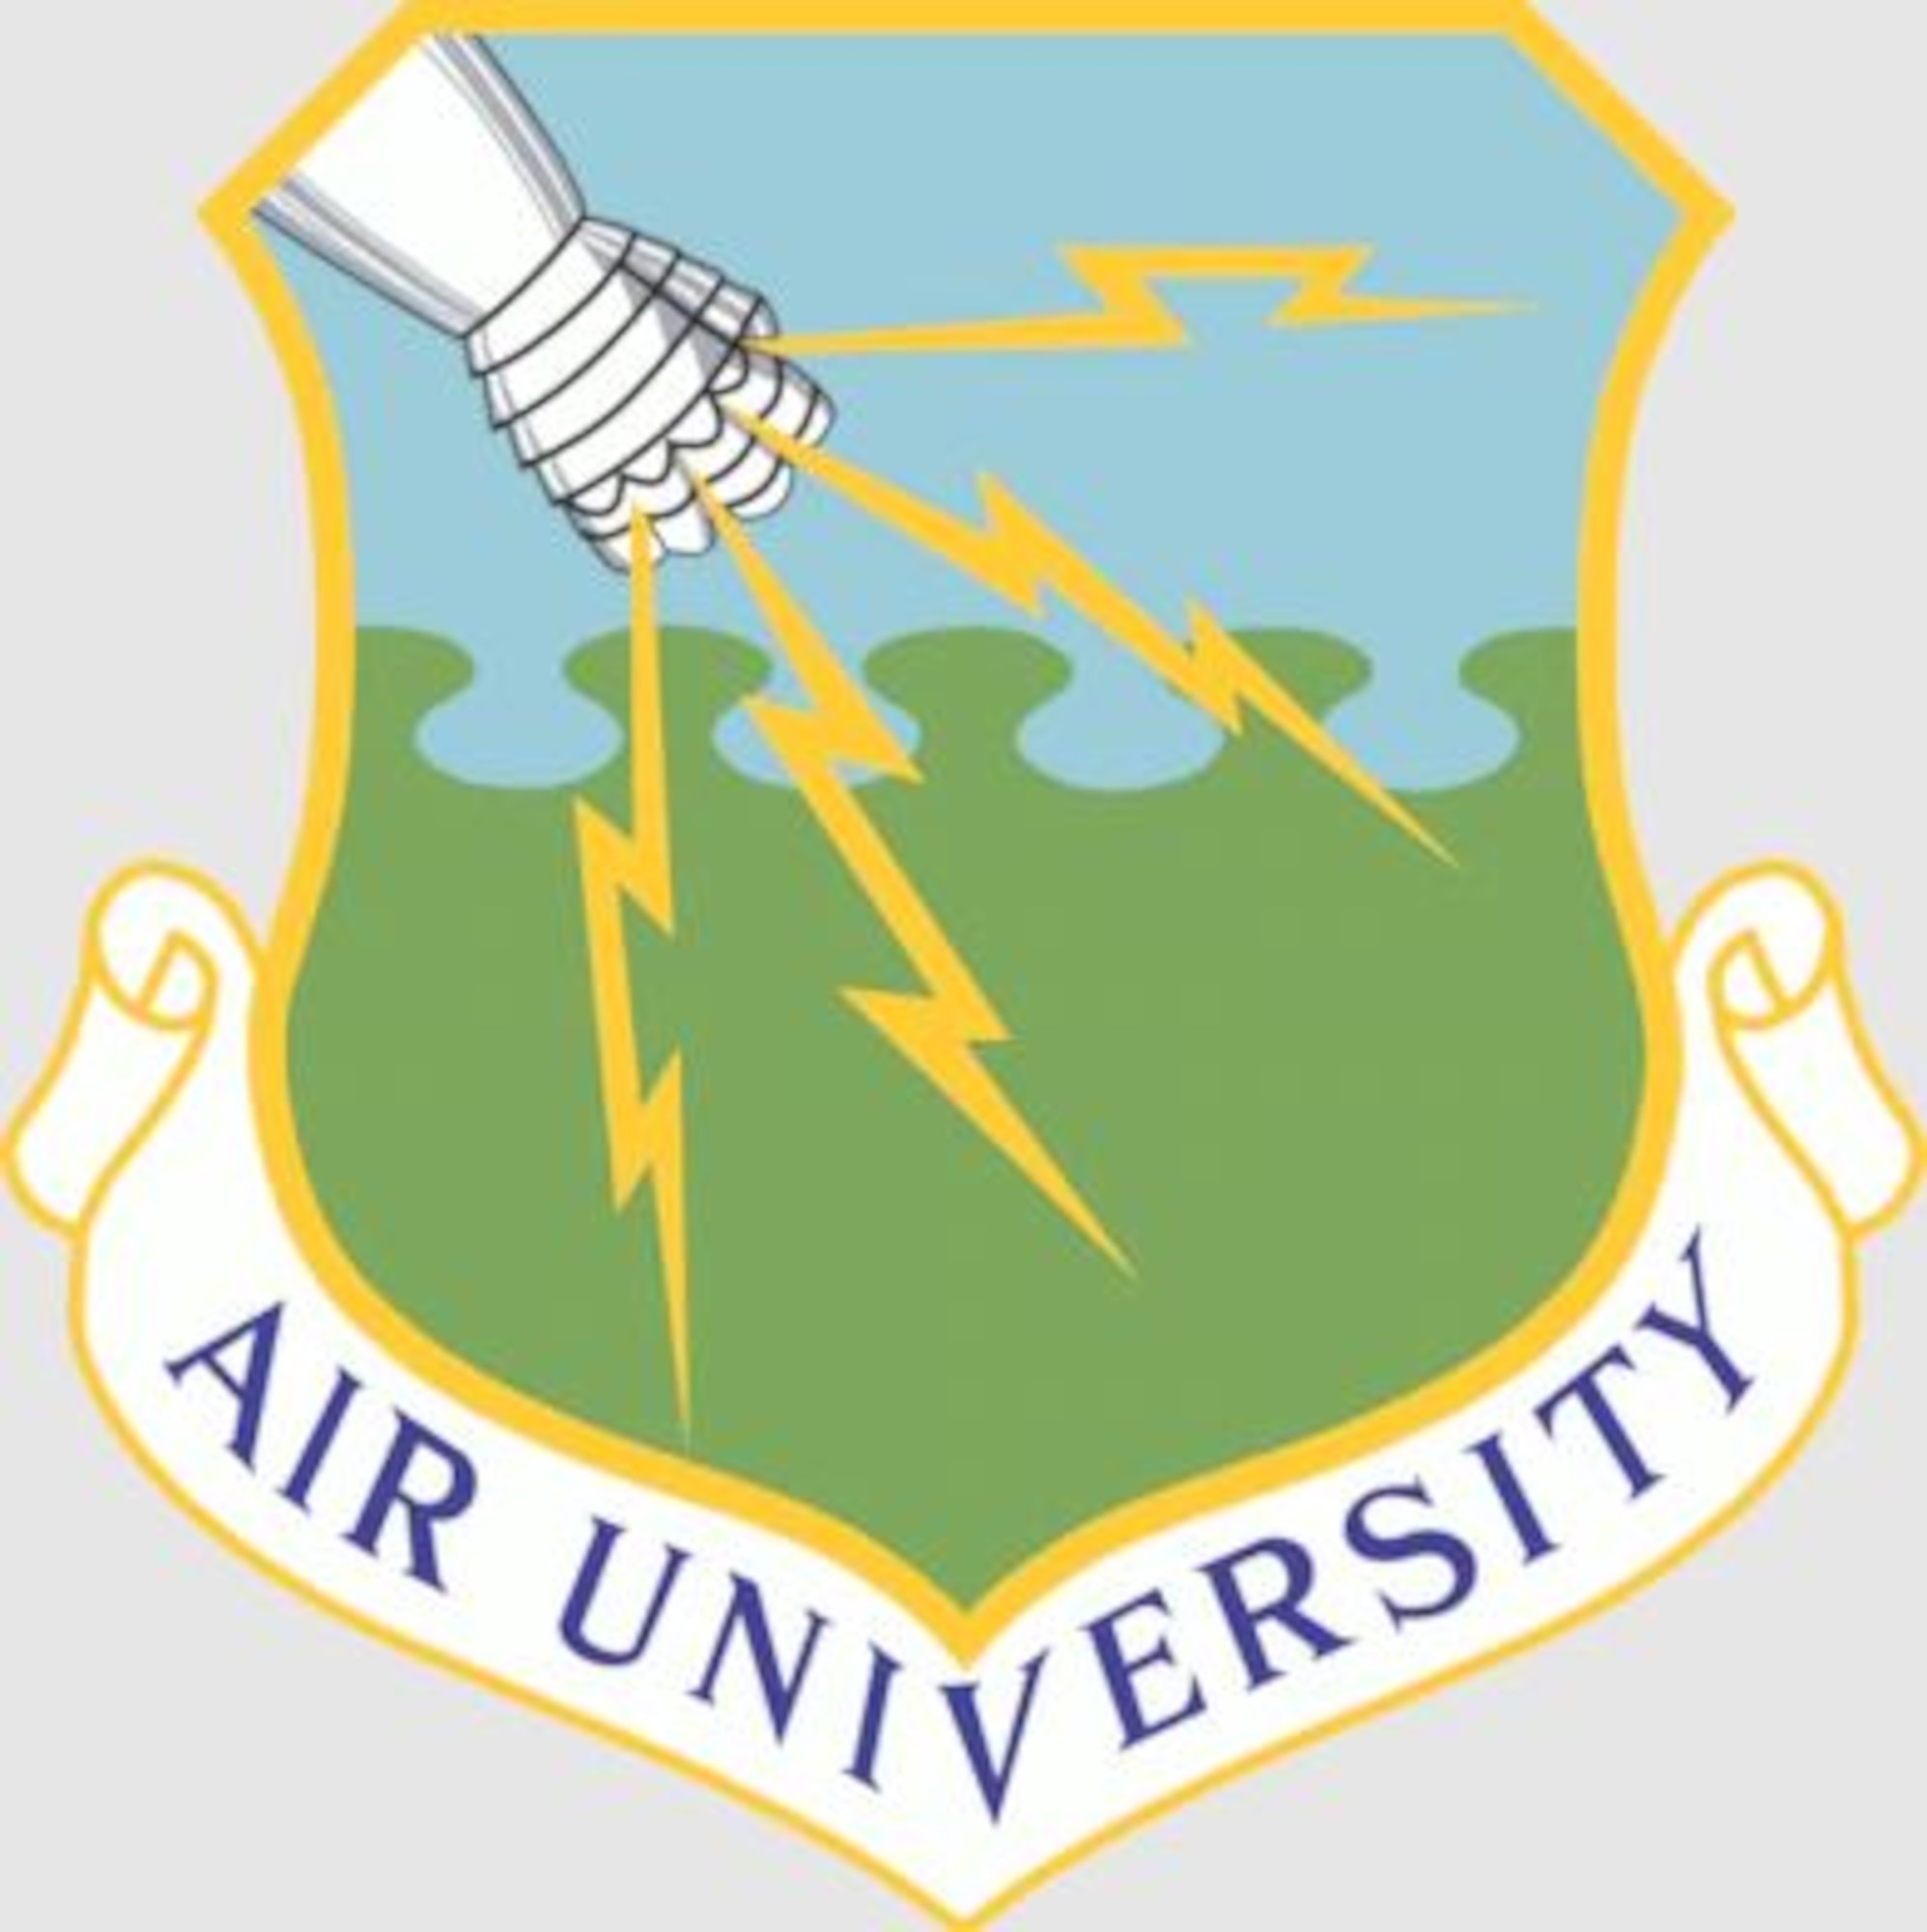 Air University is releasing a fully integrated and comprehensive student management system that will make it less cumbersome for educators to track students’ academic lifecycles and easier for students to check their course progress in real time. (Courtesy graphic)